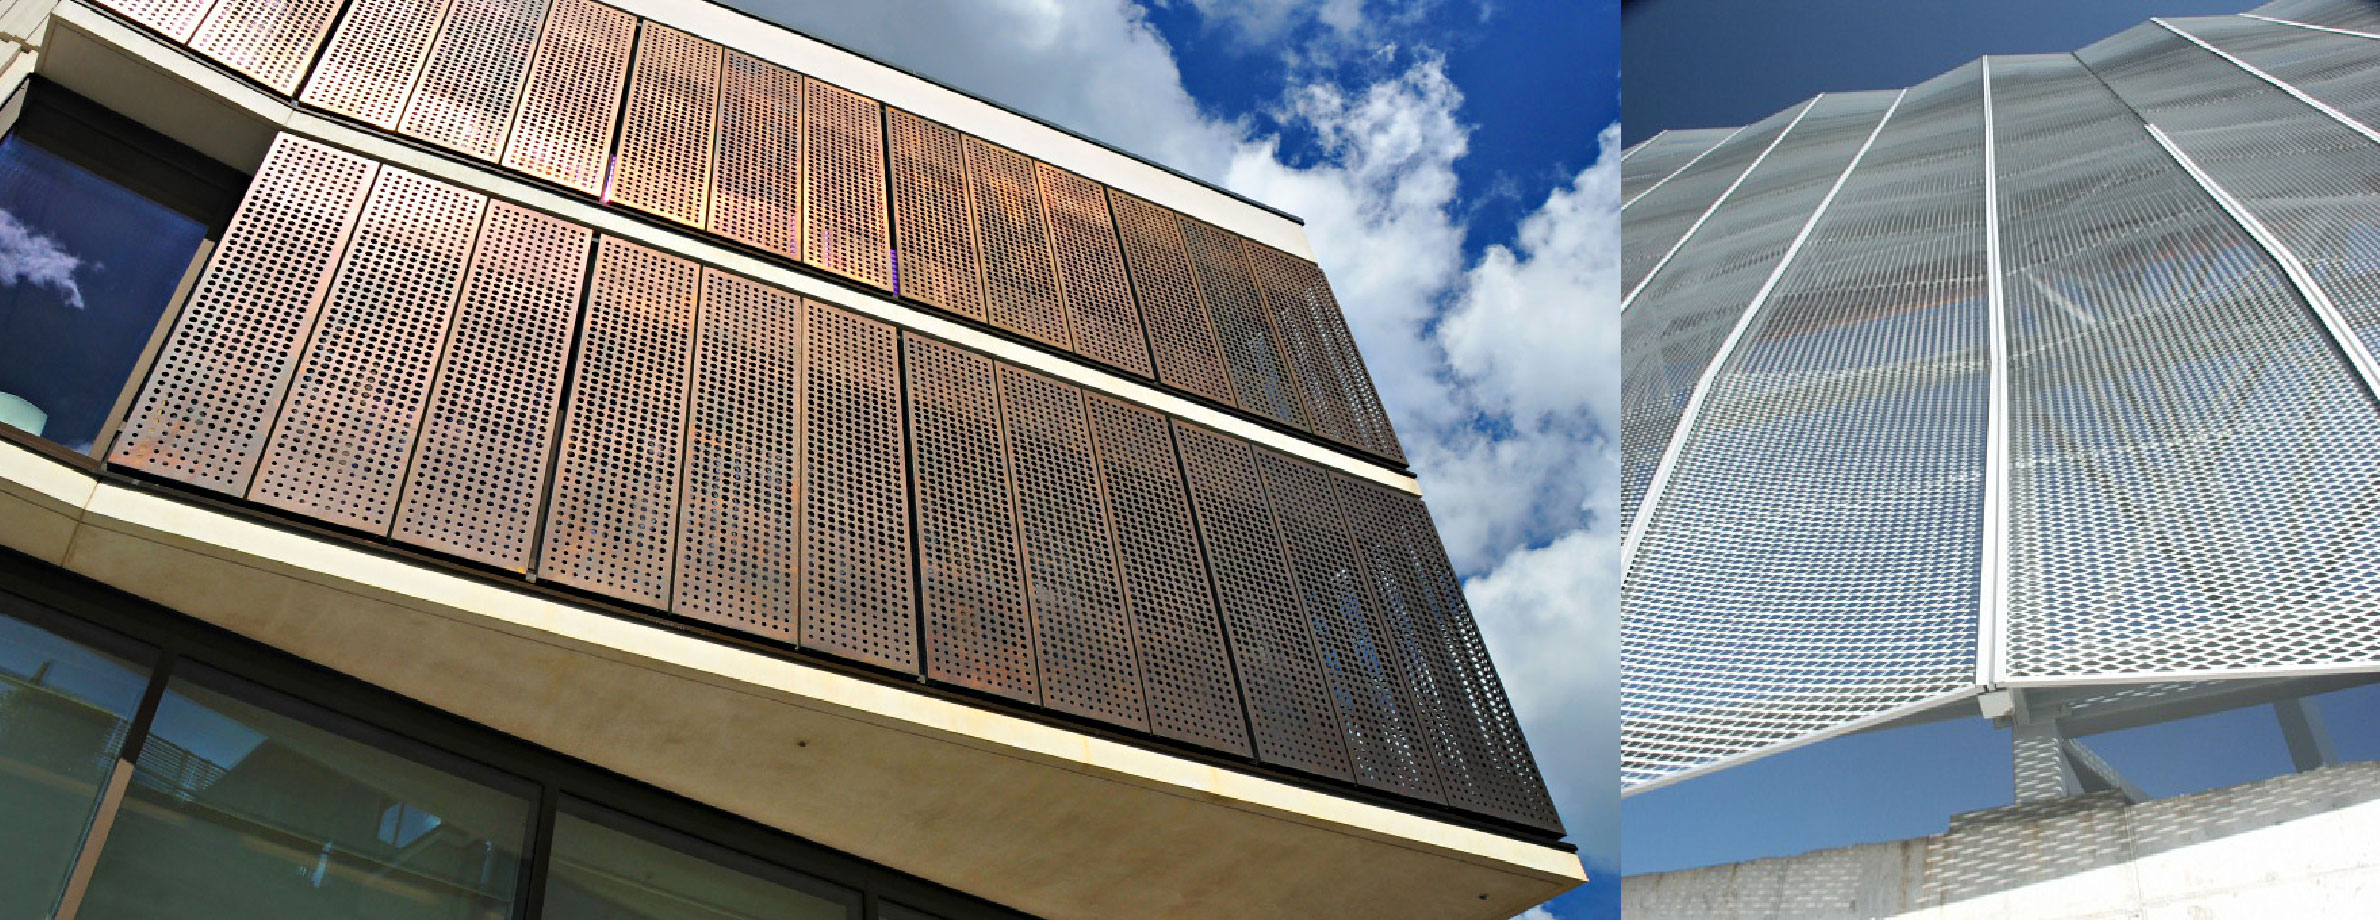 MESH (PERFORATED - EXPANDED) METAL FACADE CLADDINGS